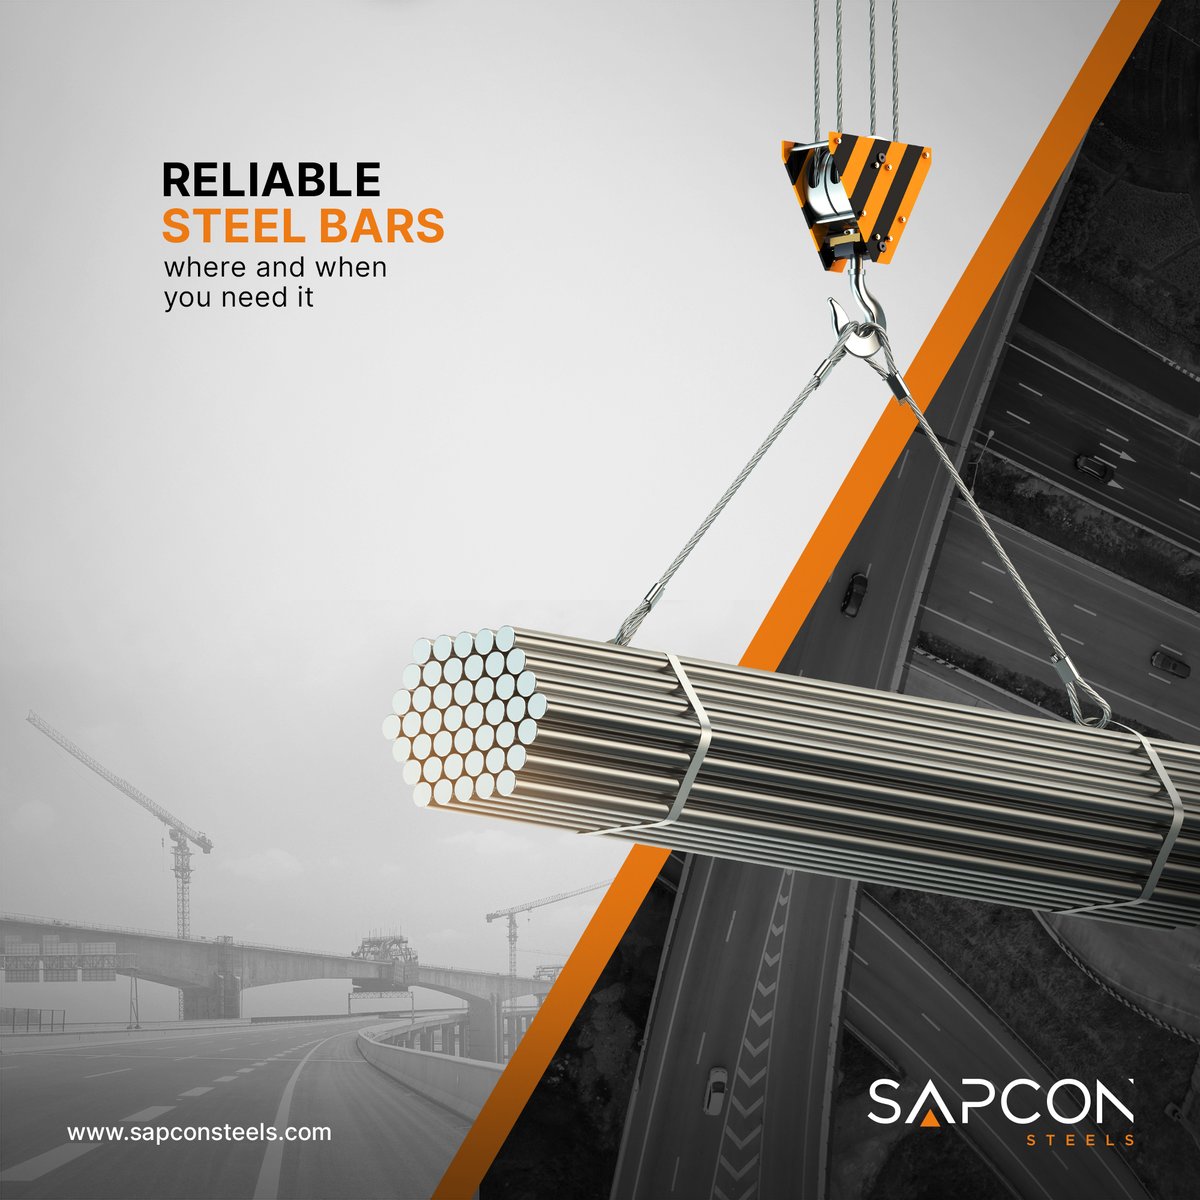 Round Steel Bars supplied by us possess high strength and exhibit properties of high toughness, good bendability, and weldability. It ensures high performance for quality turnkey projects.

#SapconSteels #SteelBars #SteelSupplierInIndia #Sourcesmartersteels